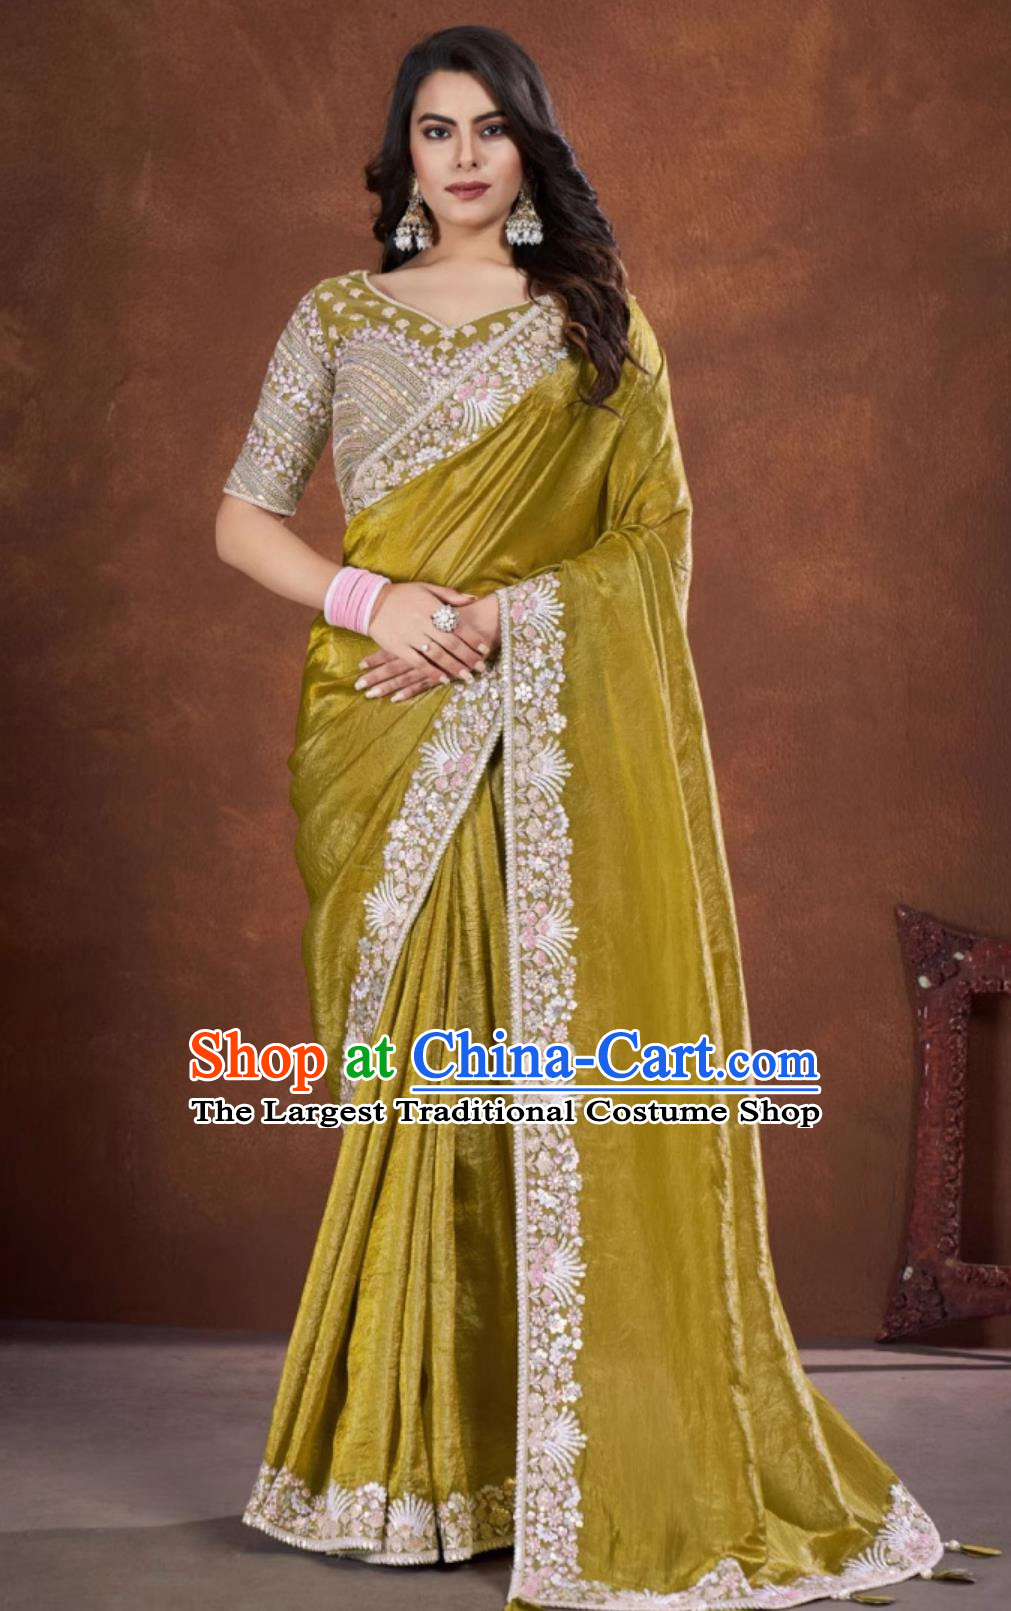 Ginger Embroidered National Indian Saree With Diamonds Features Traditional Festival Party Women Wrap Skirt Sari